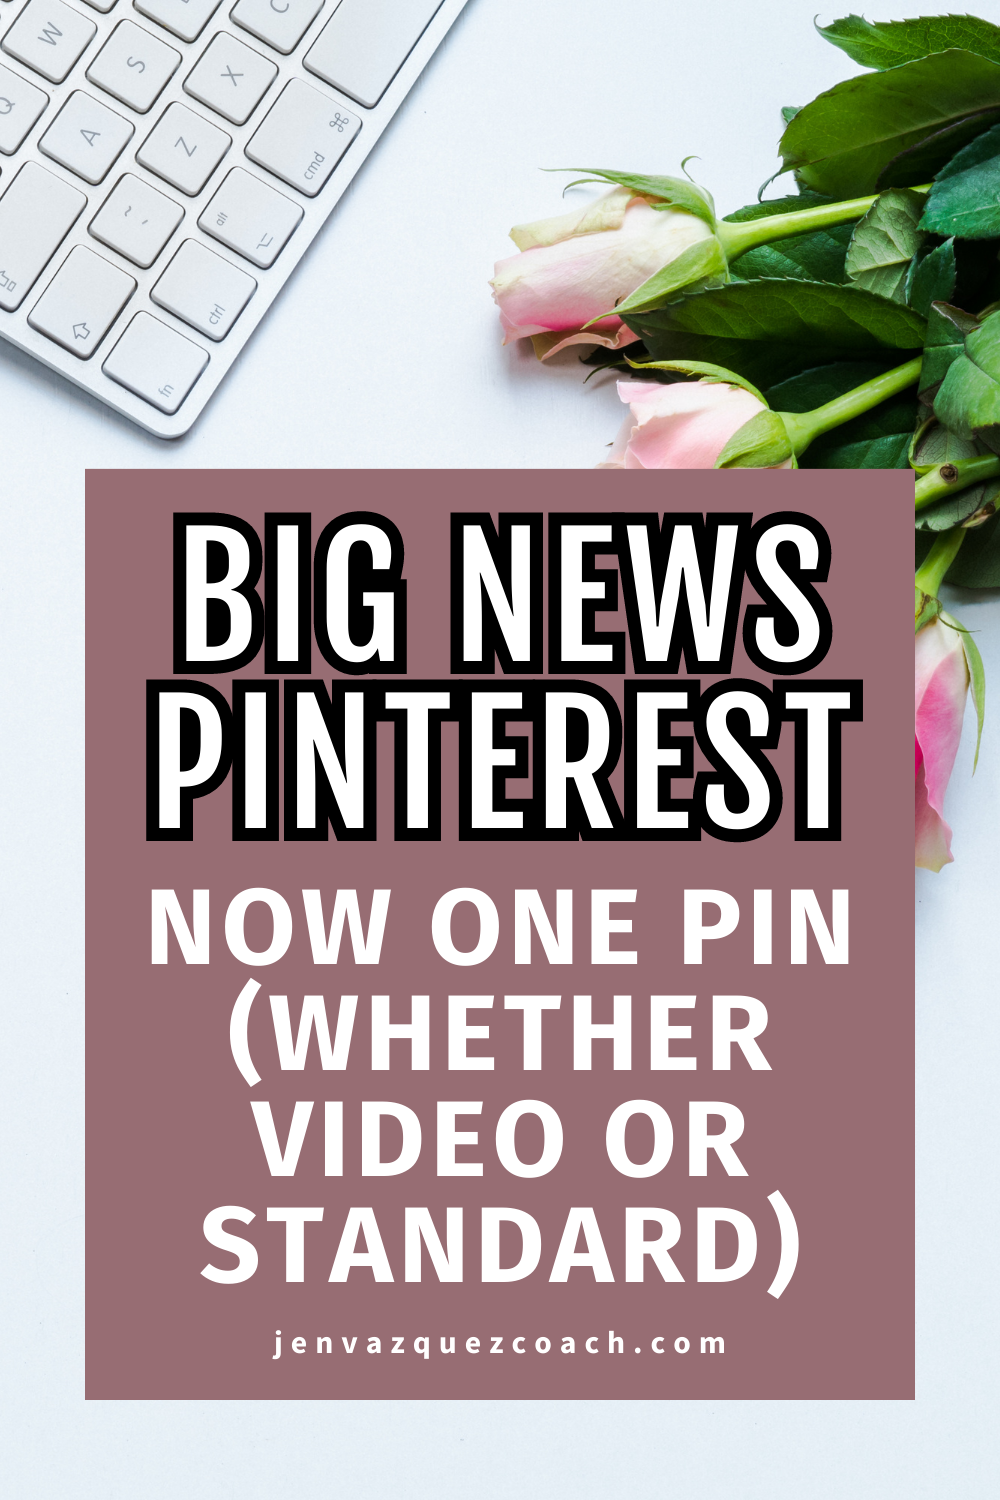 Big exciting news now one organic pin on Pinterest by Jen Vazquez media 